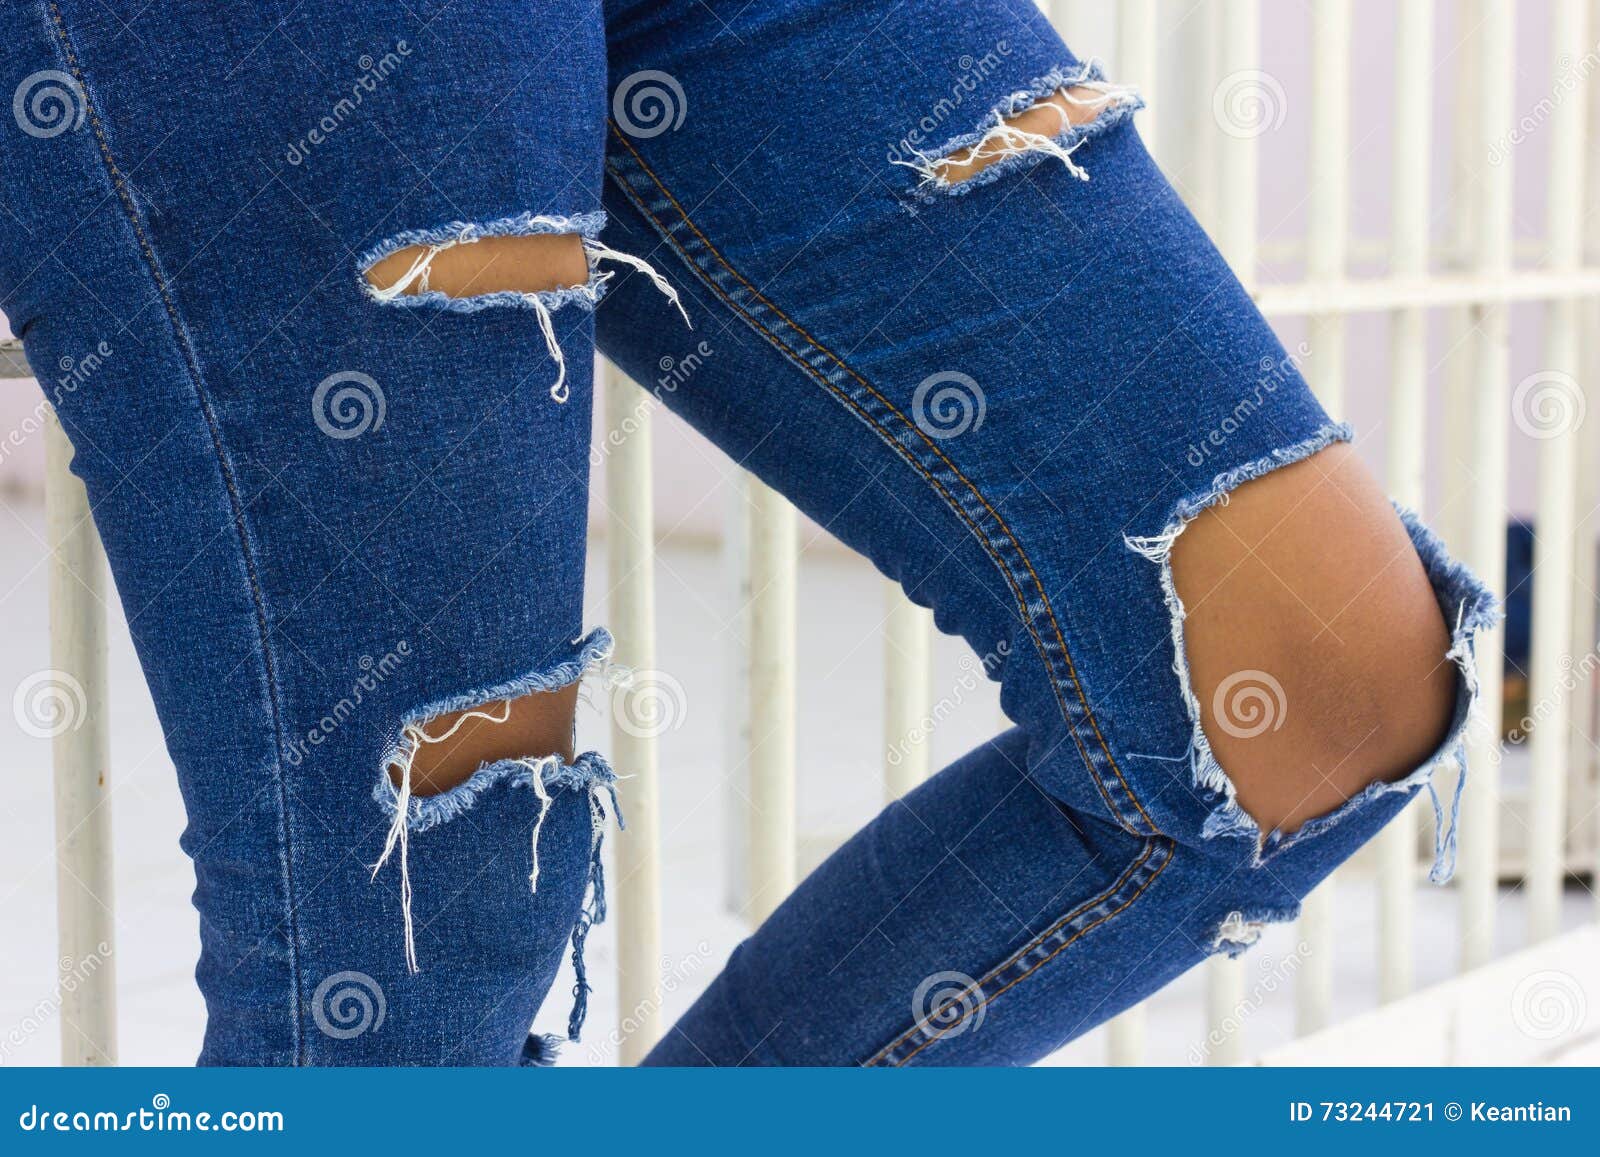 Torn jeans with jail. stock image. Image of pattern, denim - 73244721